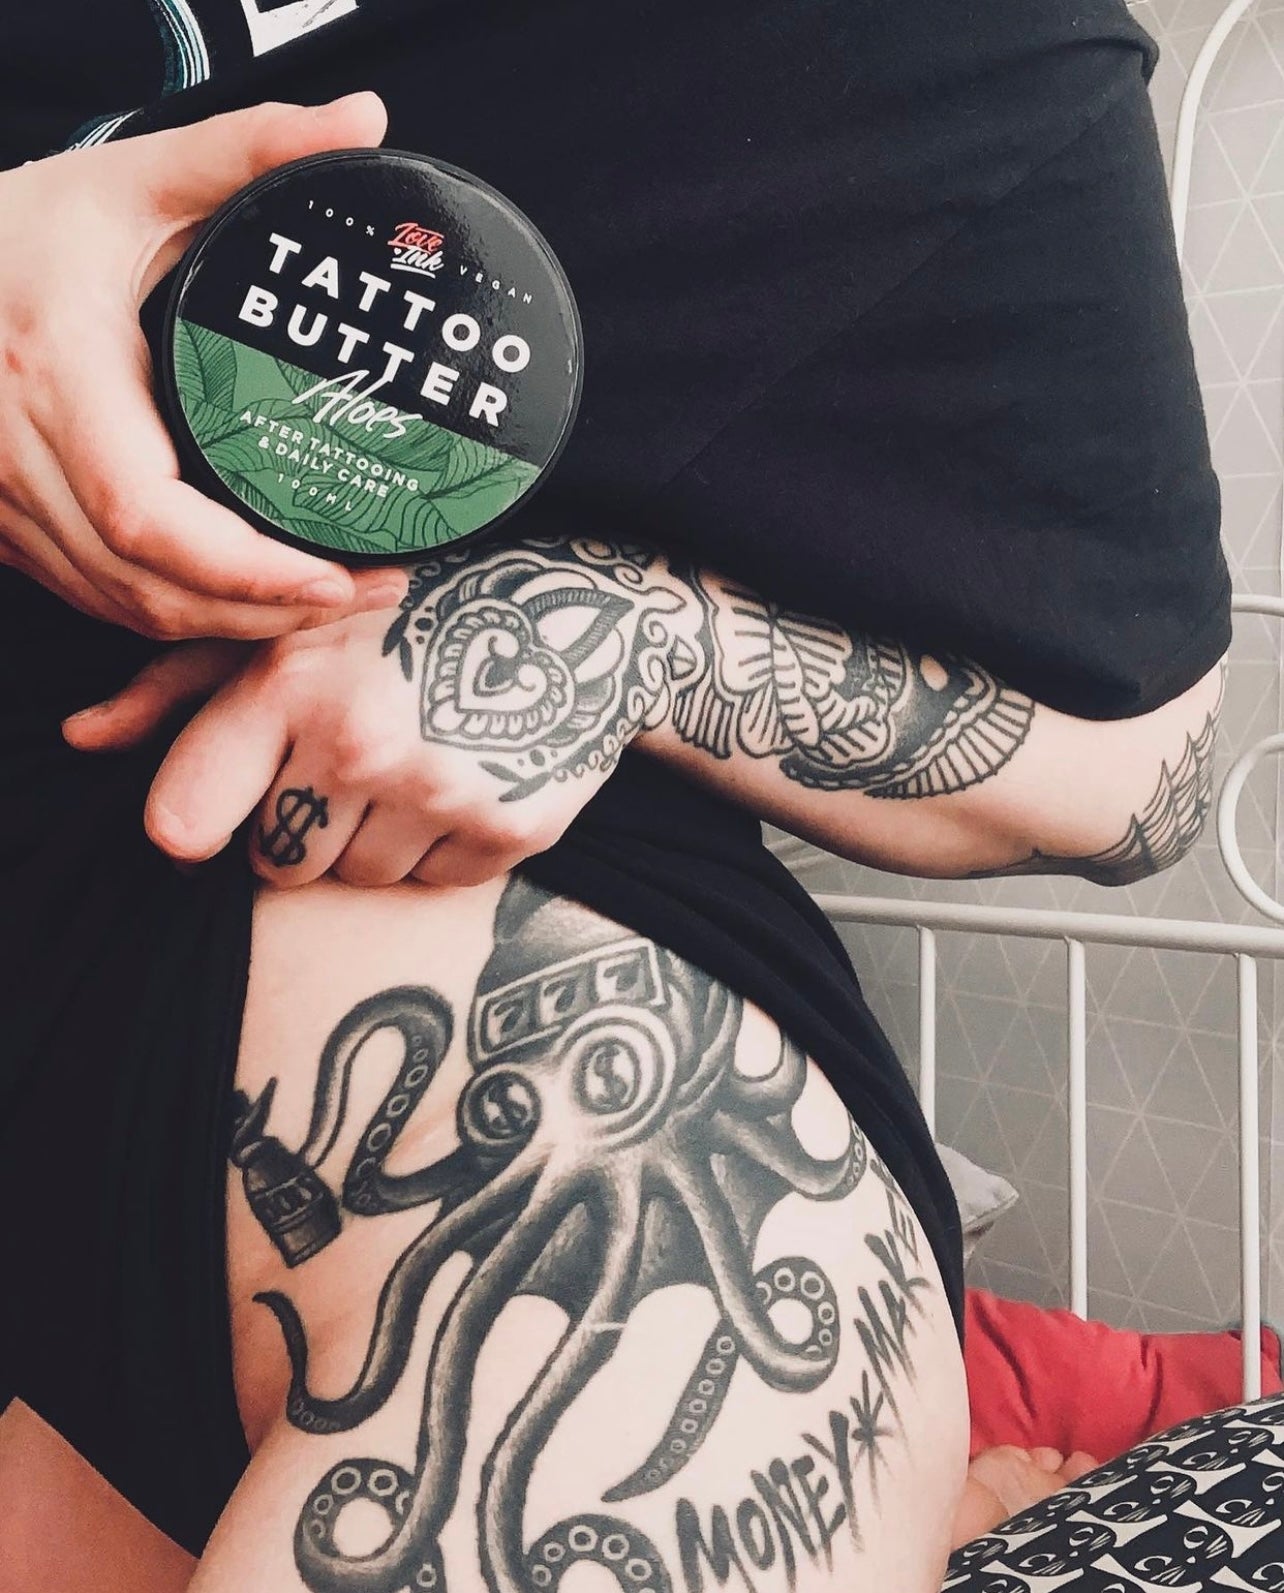 Tattooed person holding a tin of Love Ink Tattoo Butter Aloe, with detailed tattoos visible on their arm and leg.